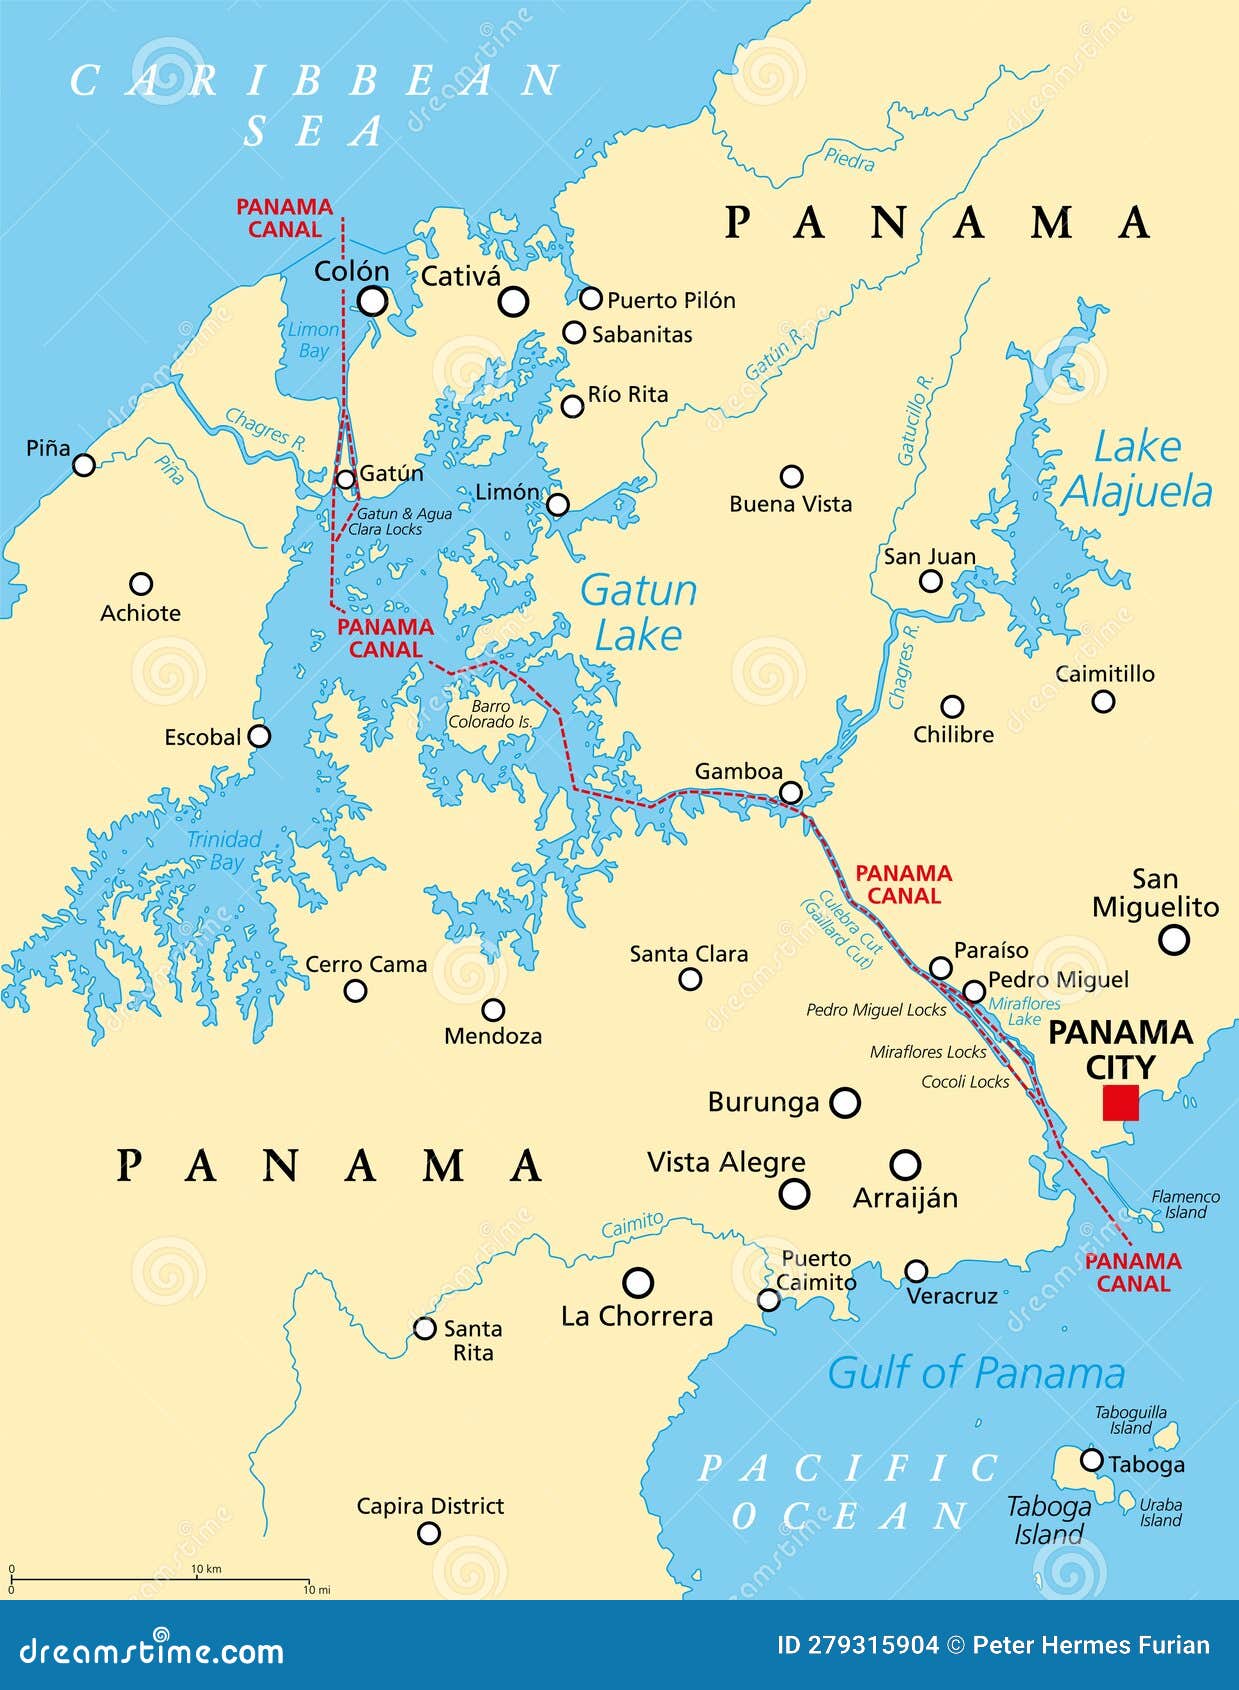 panama canal, artificial waterway in panama, political map